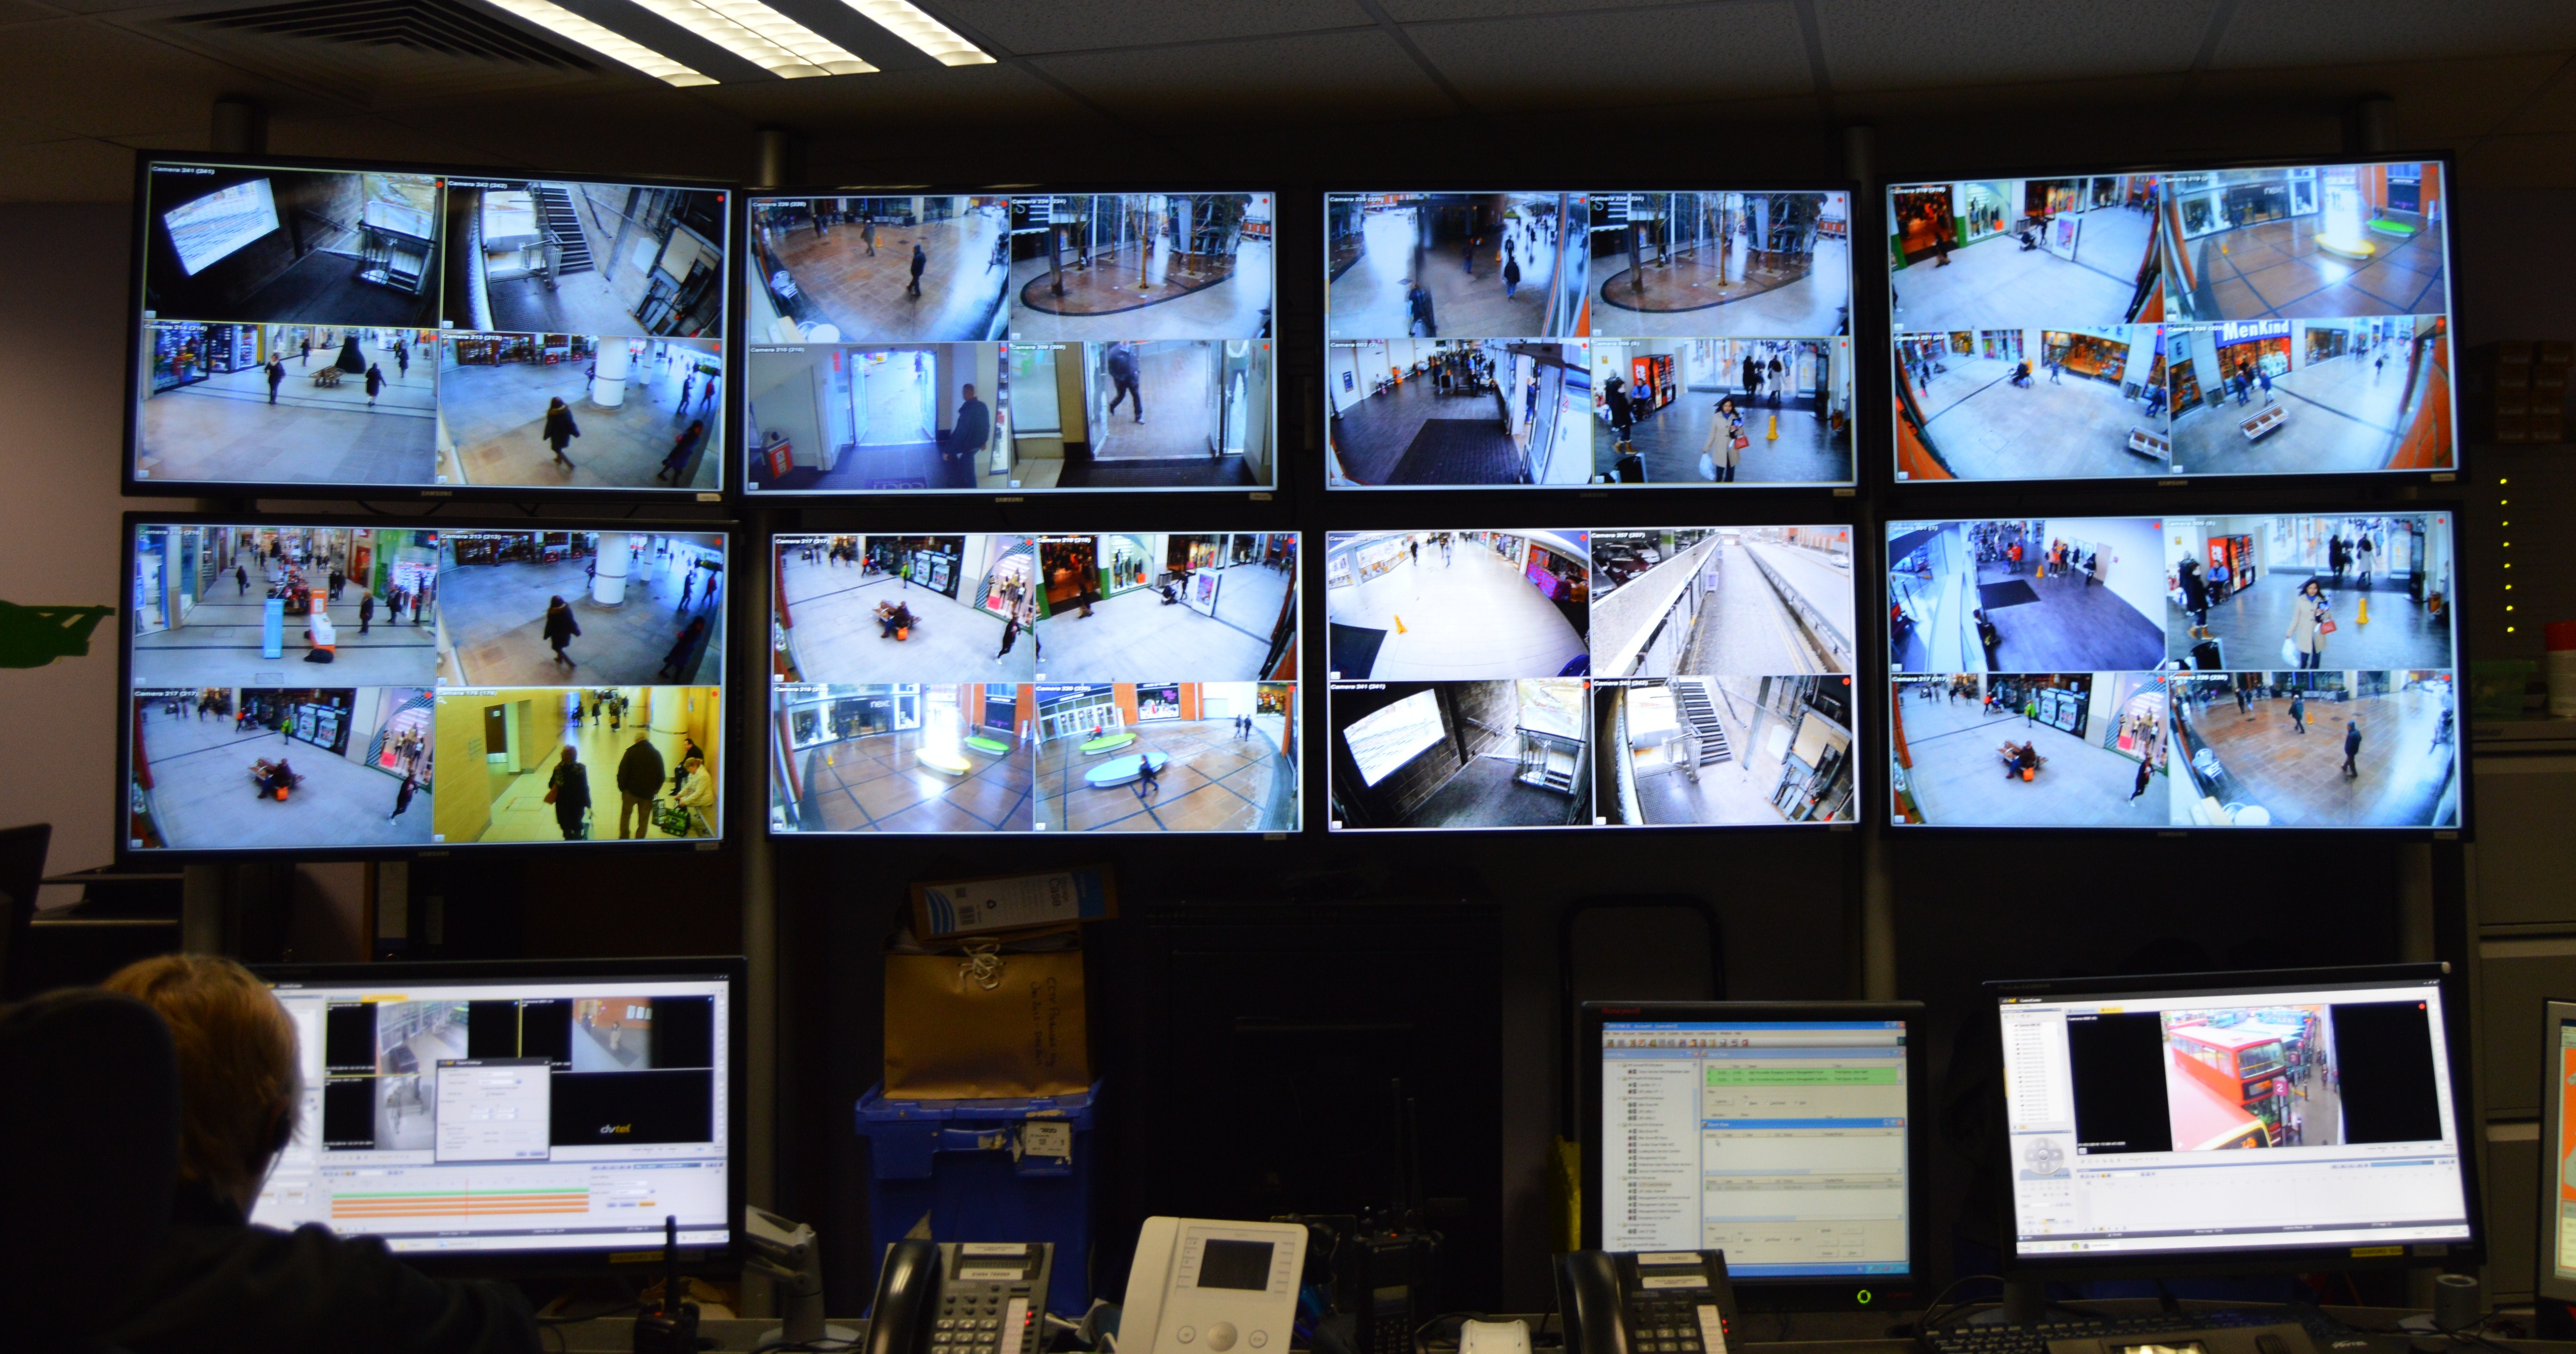 All camera video feeds are terminated within the center's control room which is manned 24/7.